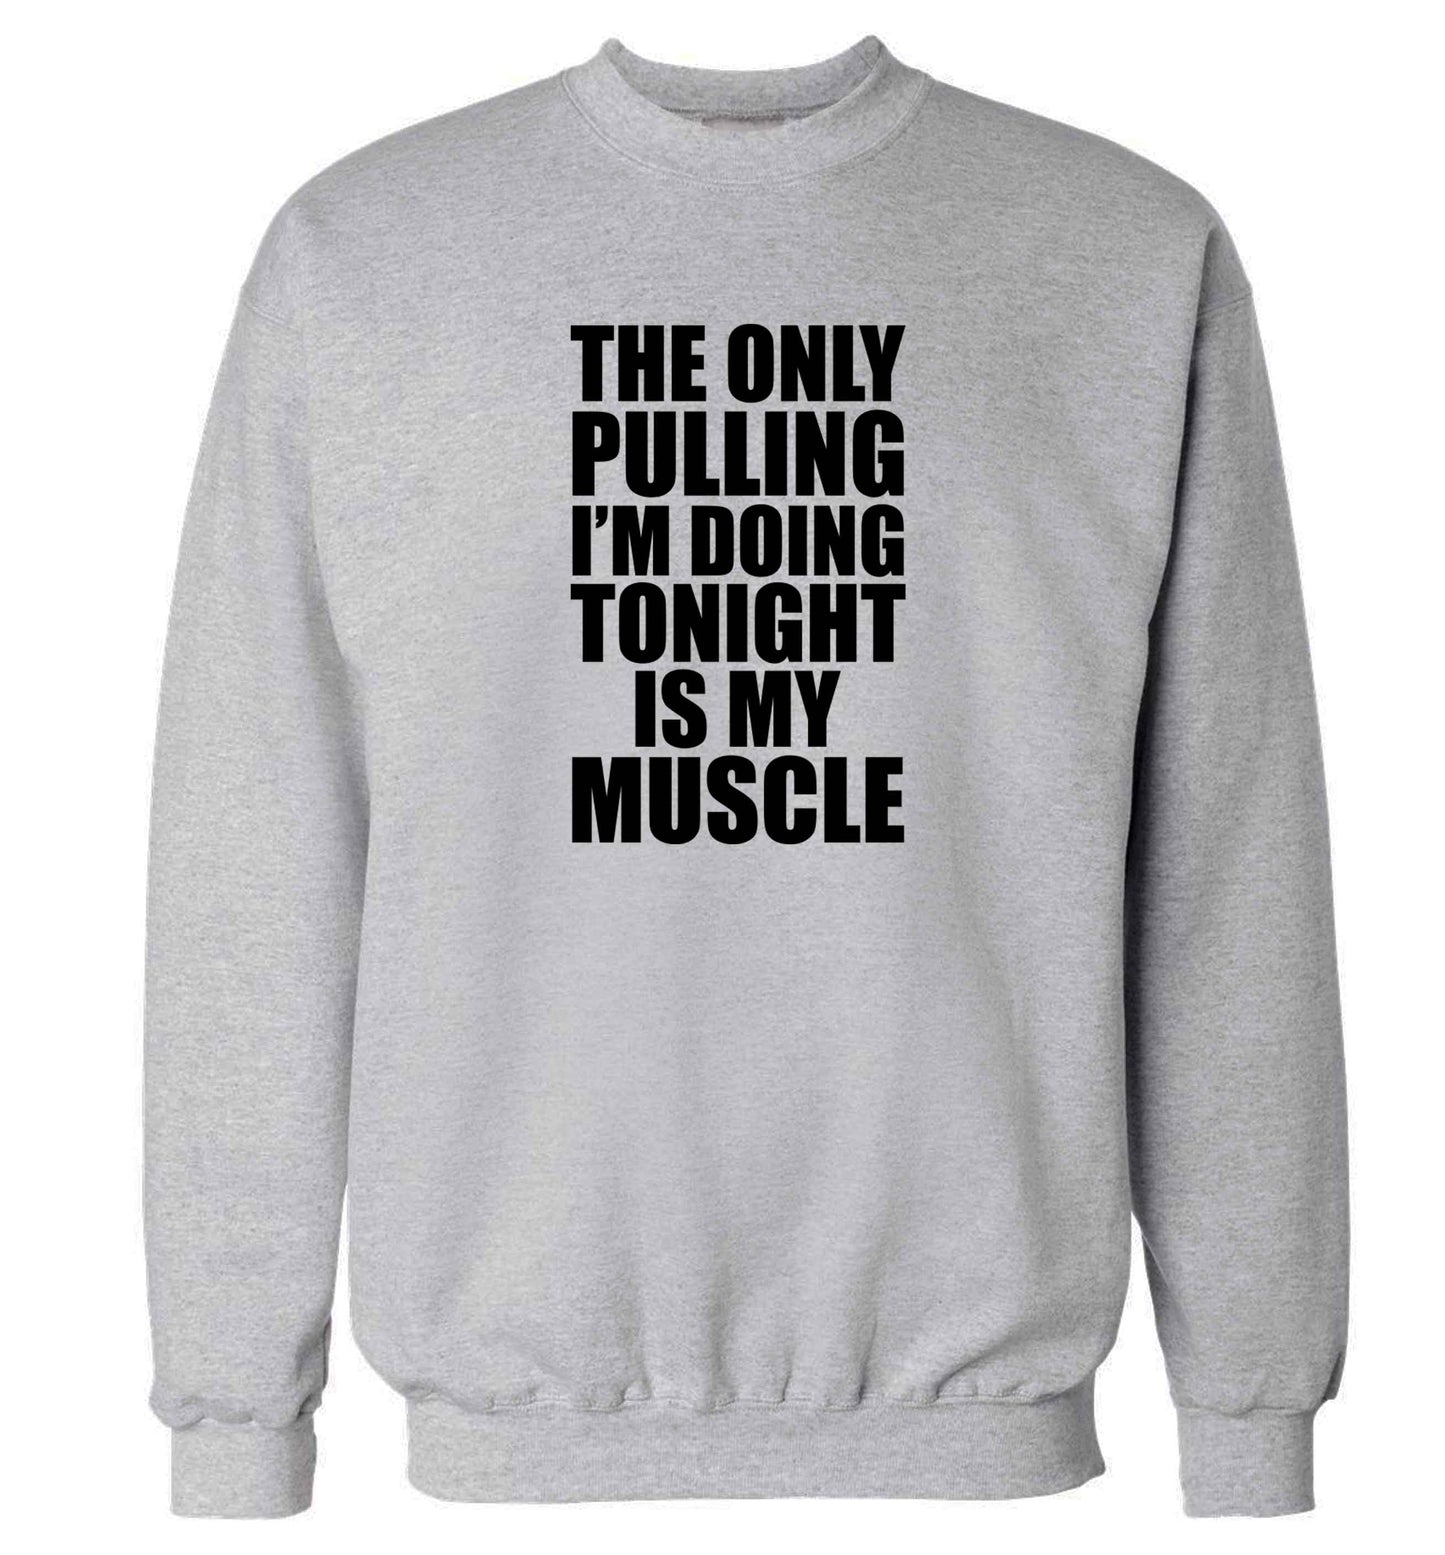 The only pulling I'm doing tonight is my muscle adult's unisex grey sweater 2XL